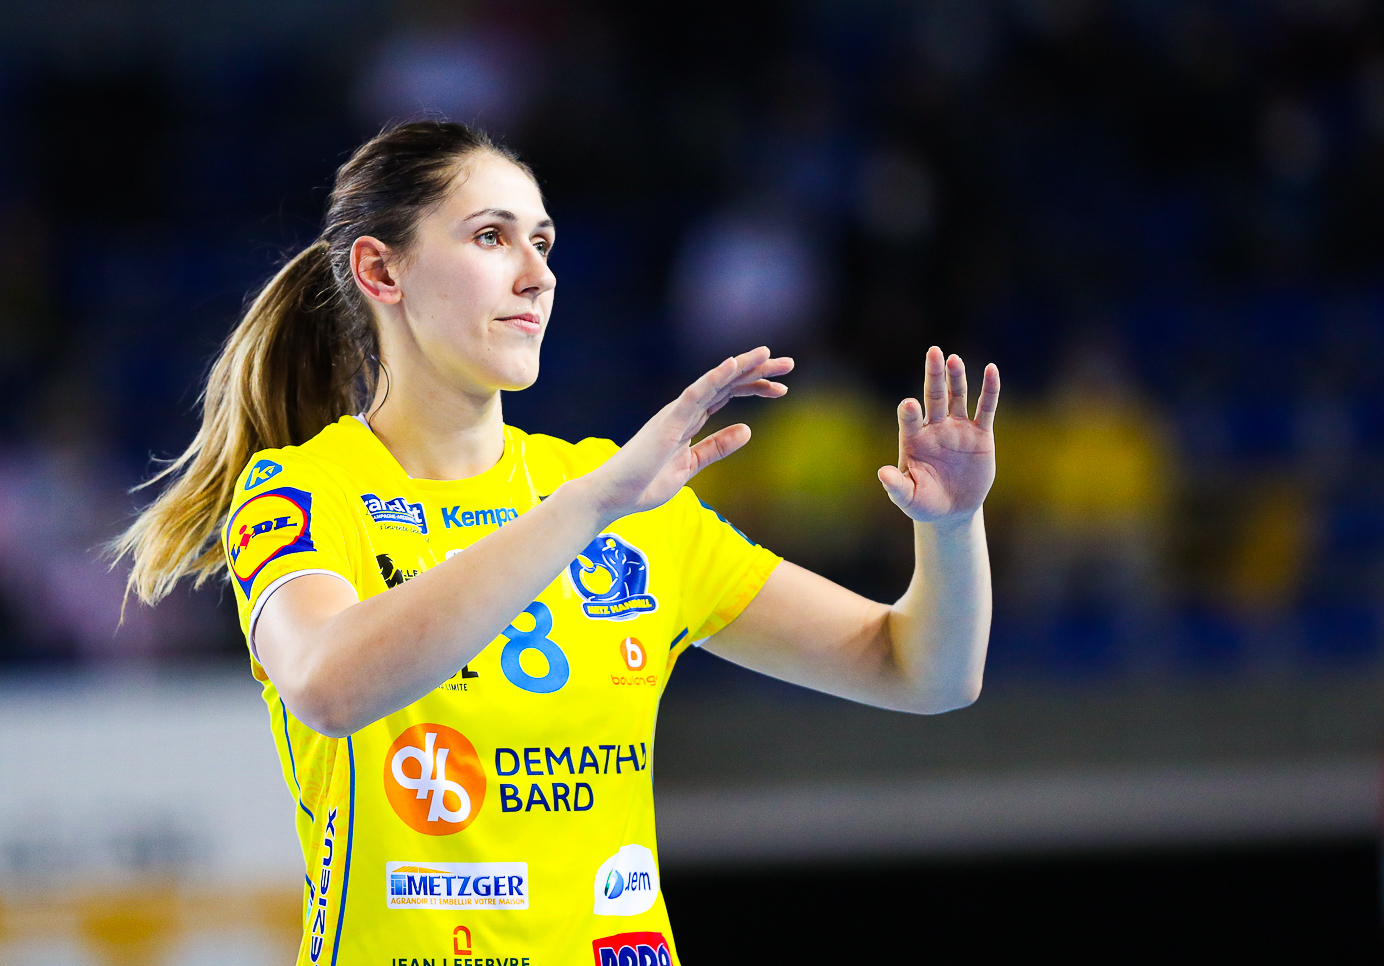 Camilla Micijevic of Metz Handball during the EHF Women's Champions League match between Metz and Gyori on October 23, 2021 in Metz, France. (Photo by Bertrand Delhomme/Icon Sport)